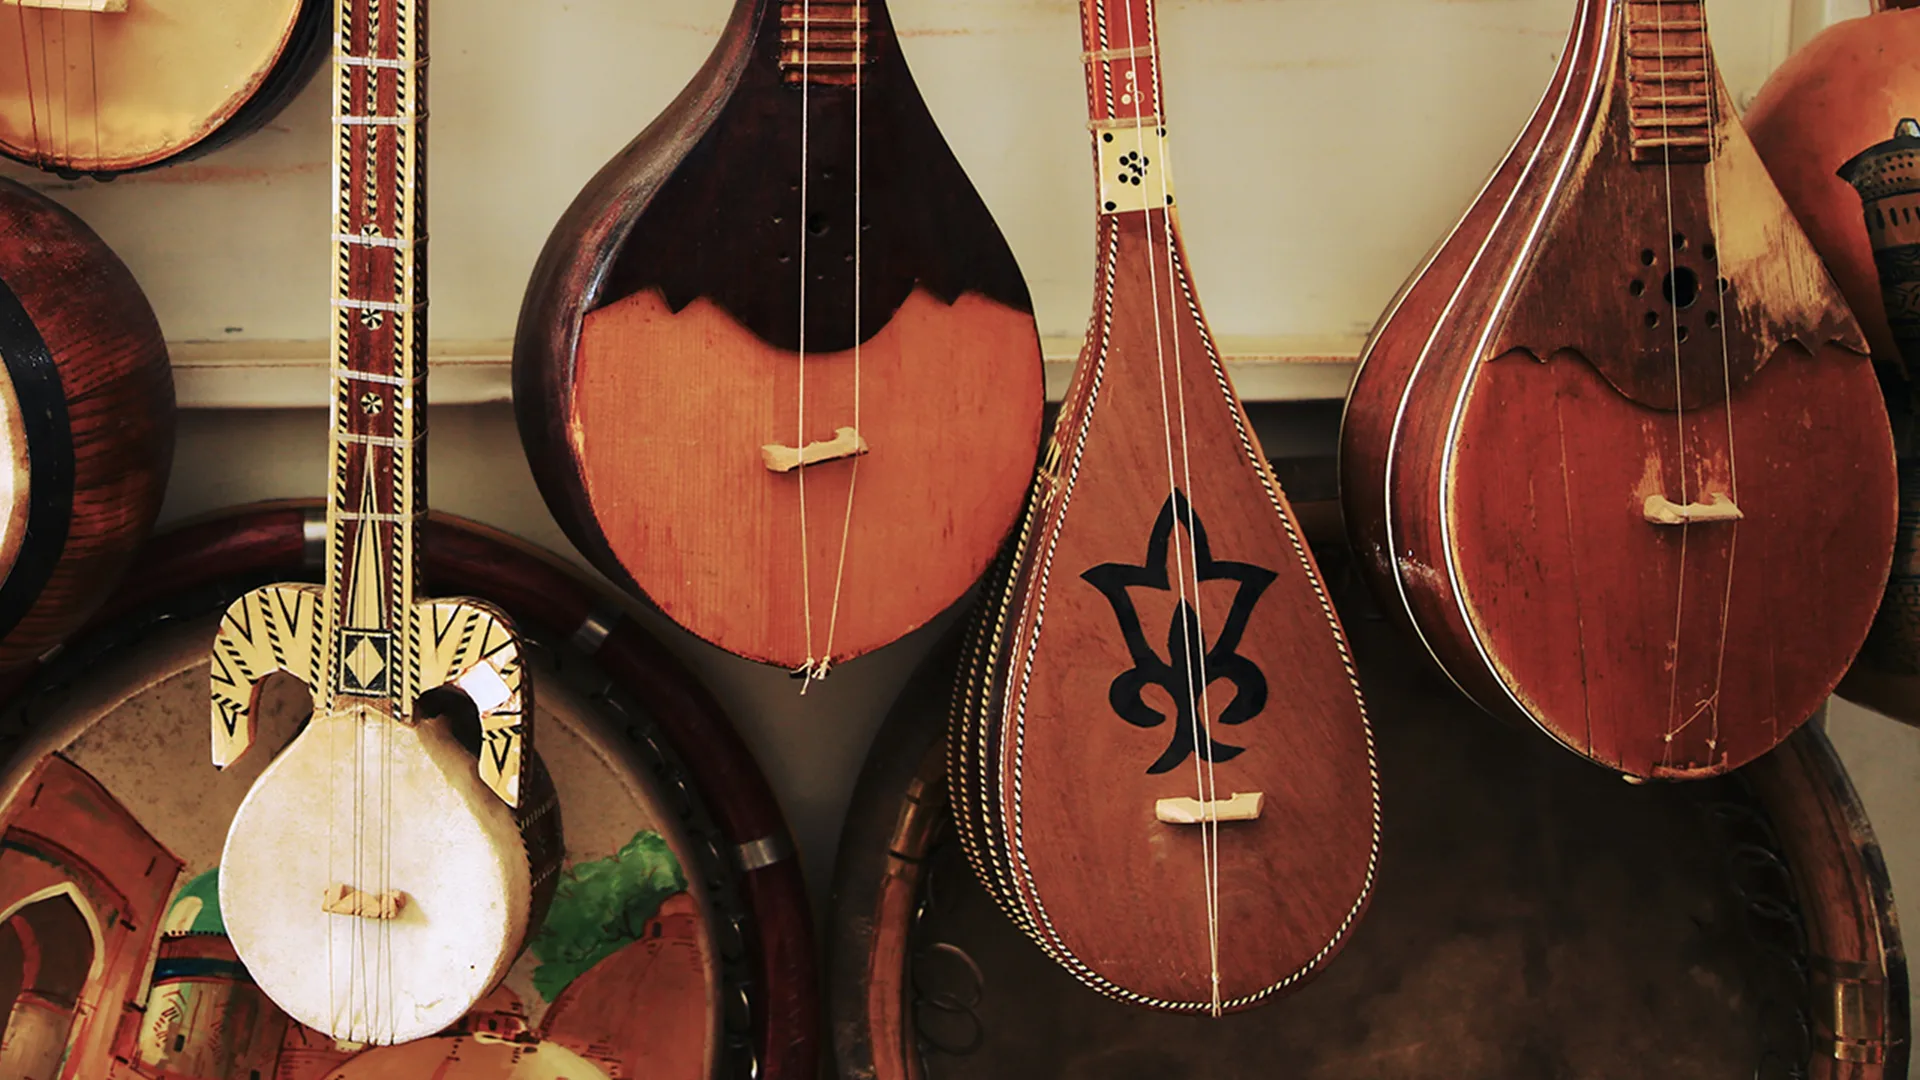 Stringed instruments displayed on wall